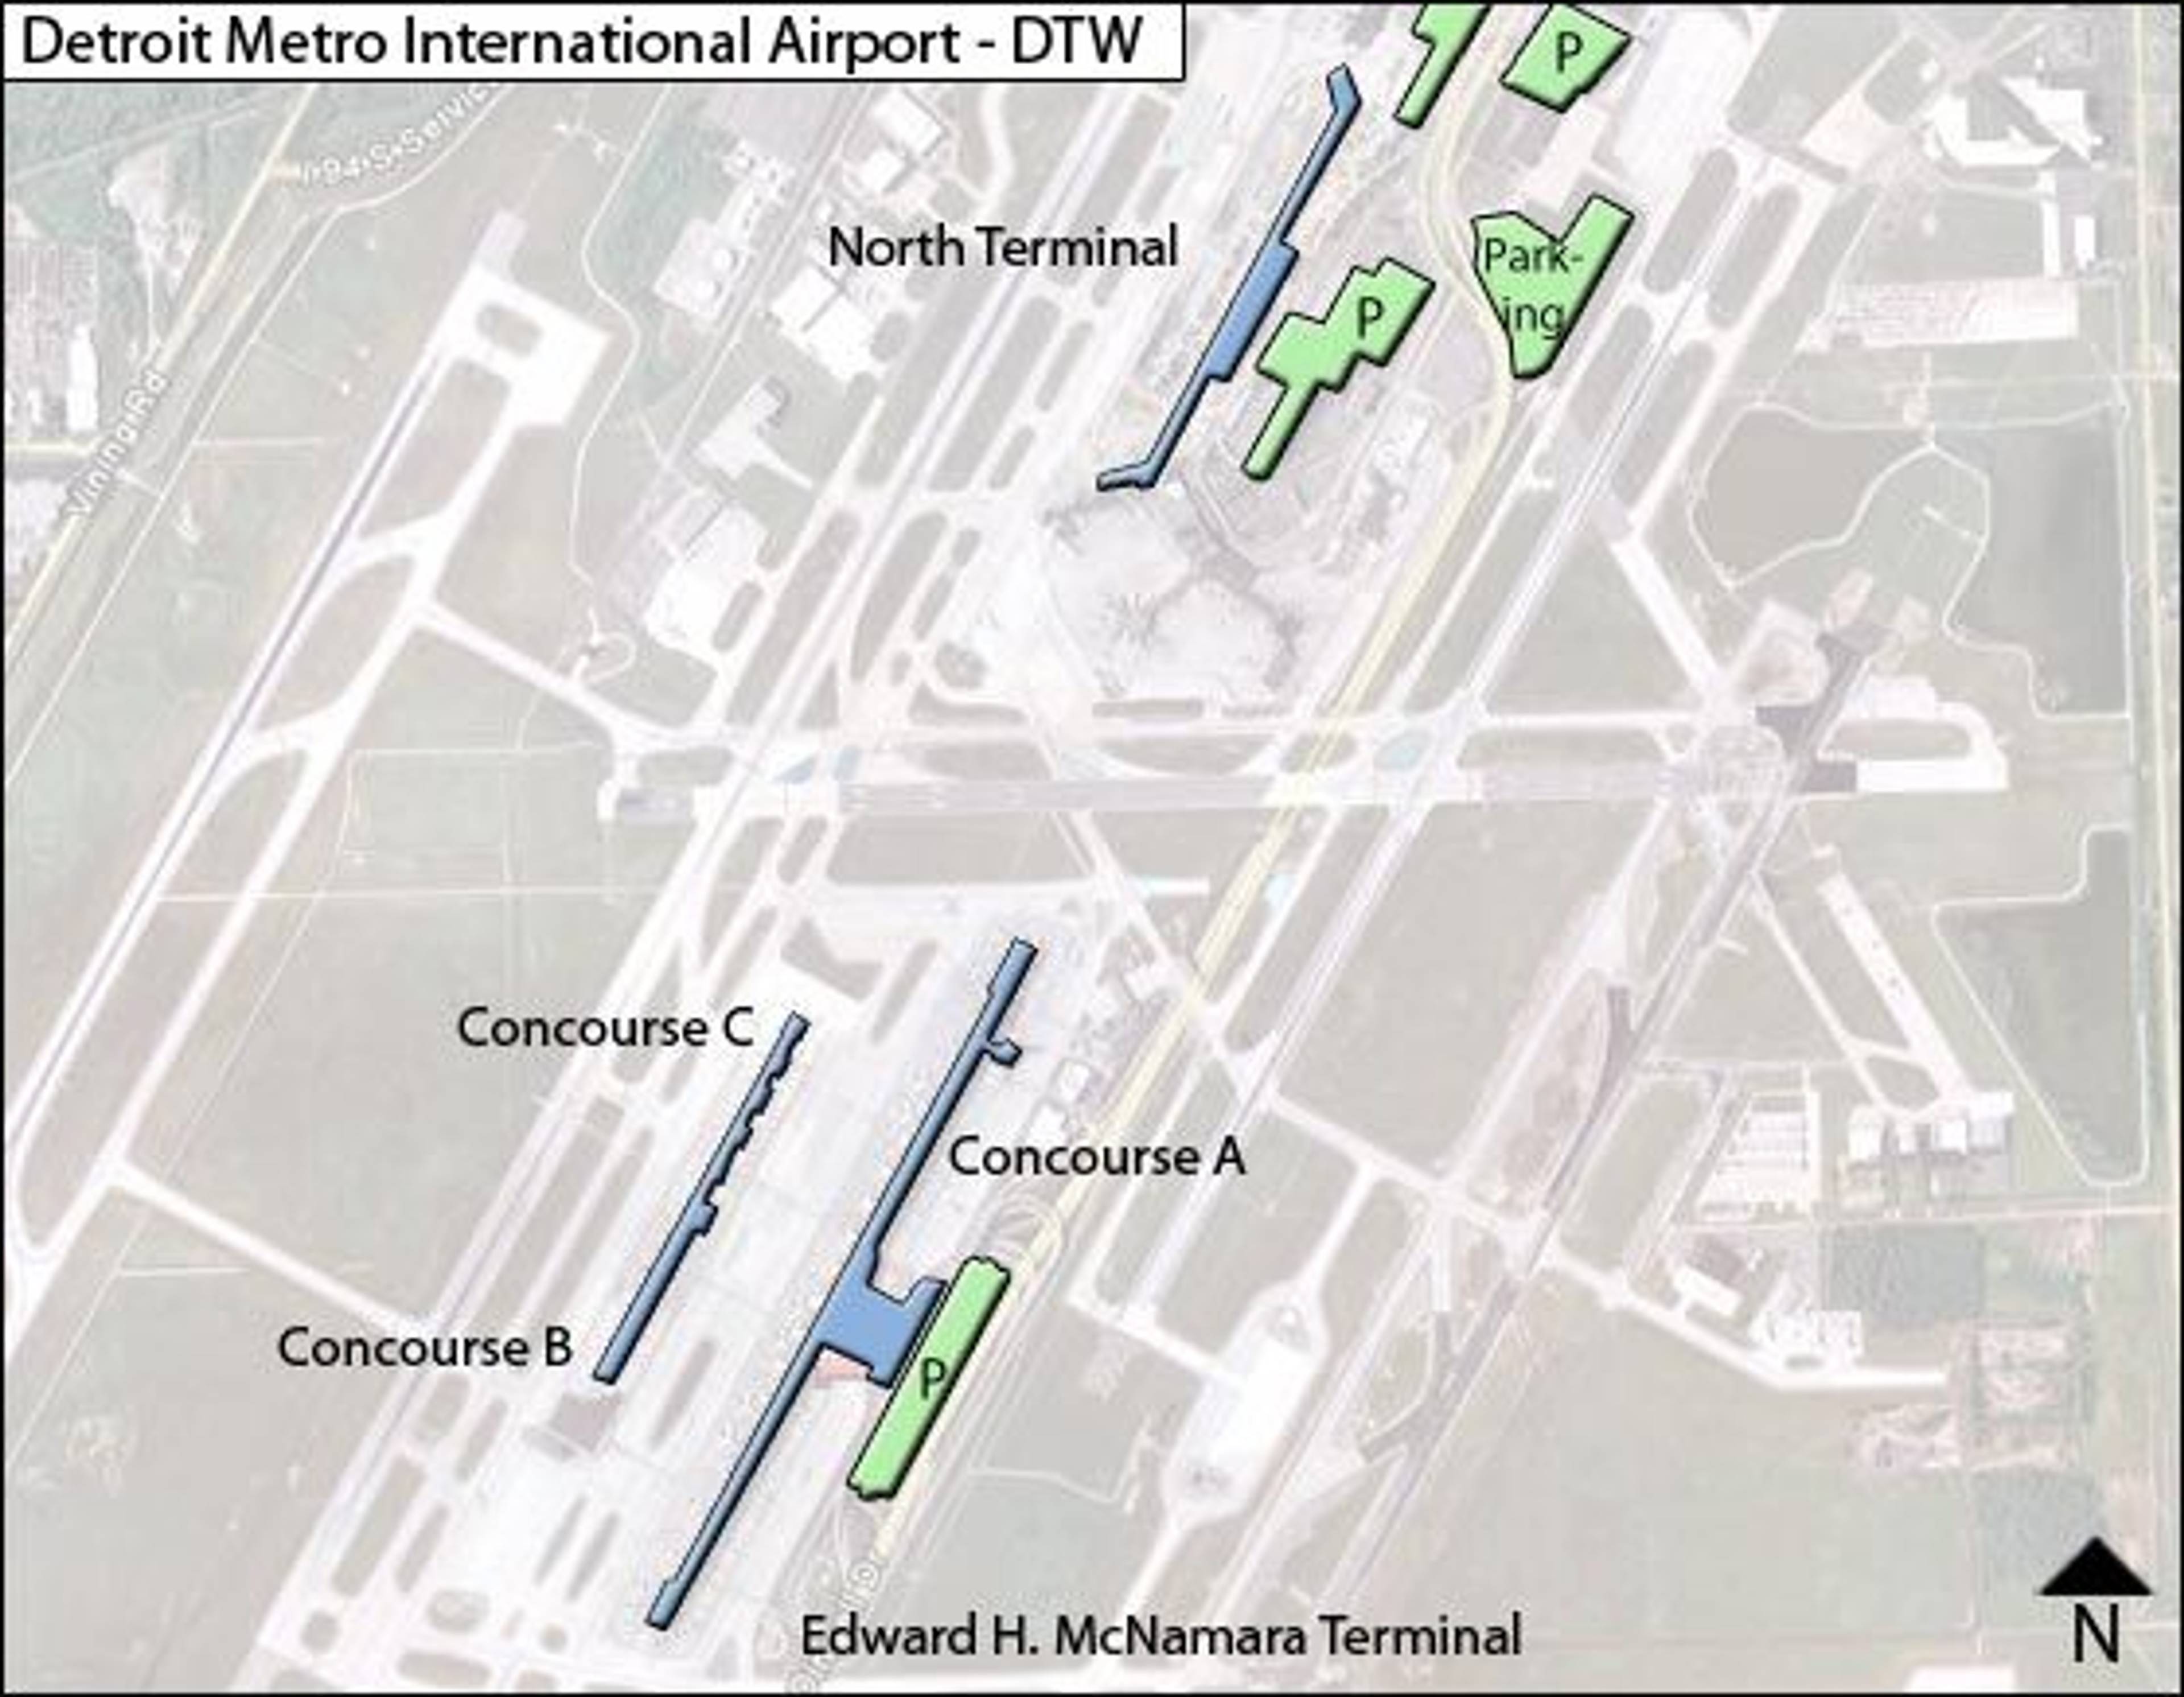 DTW Overview Map